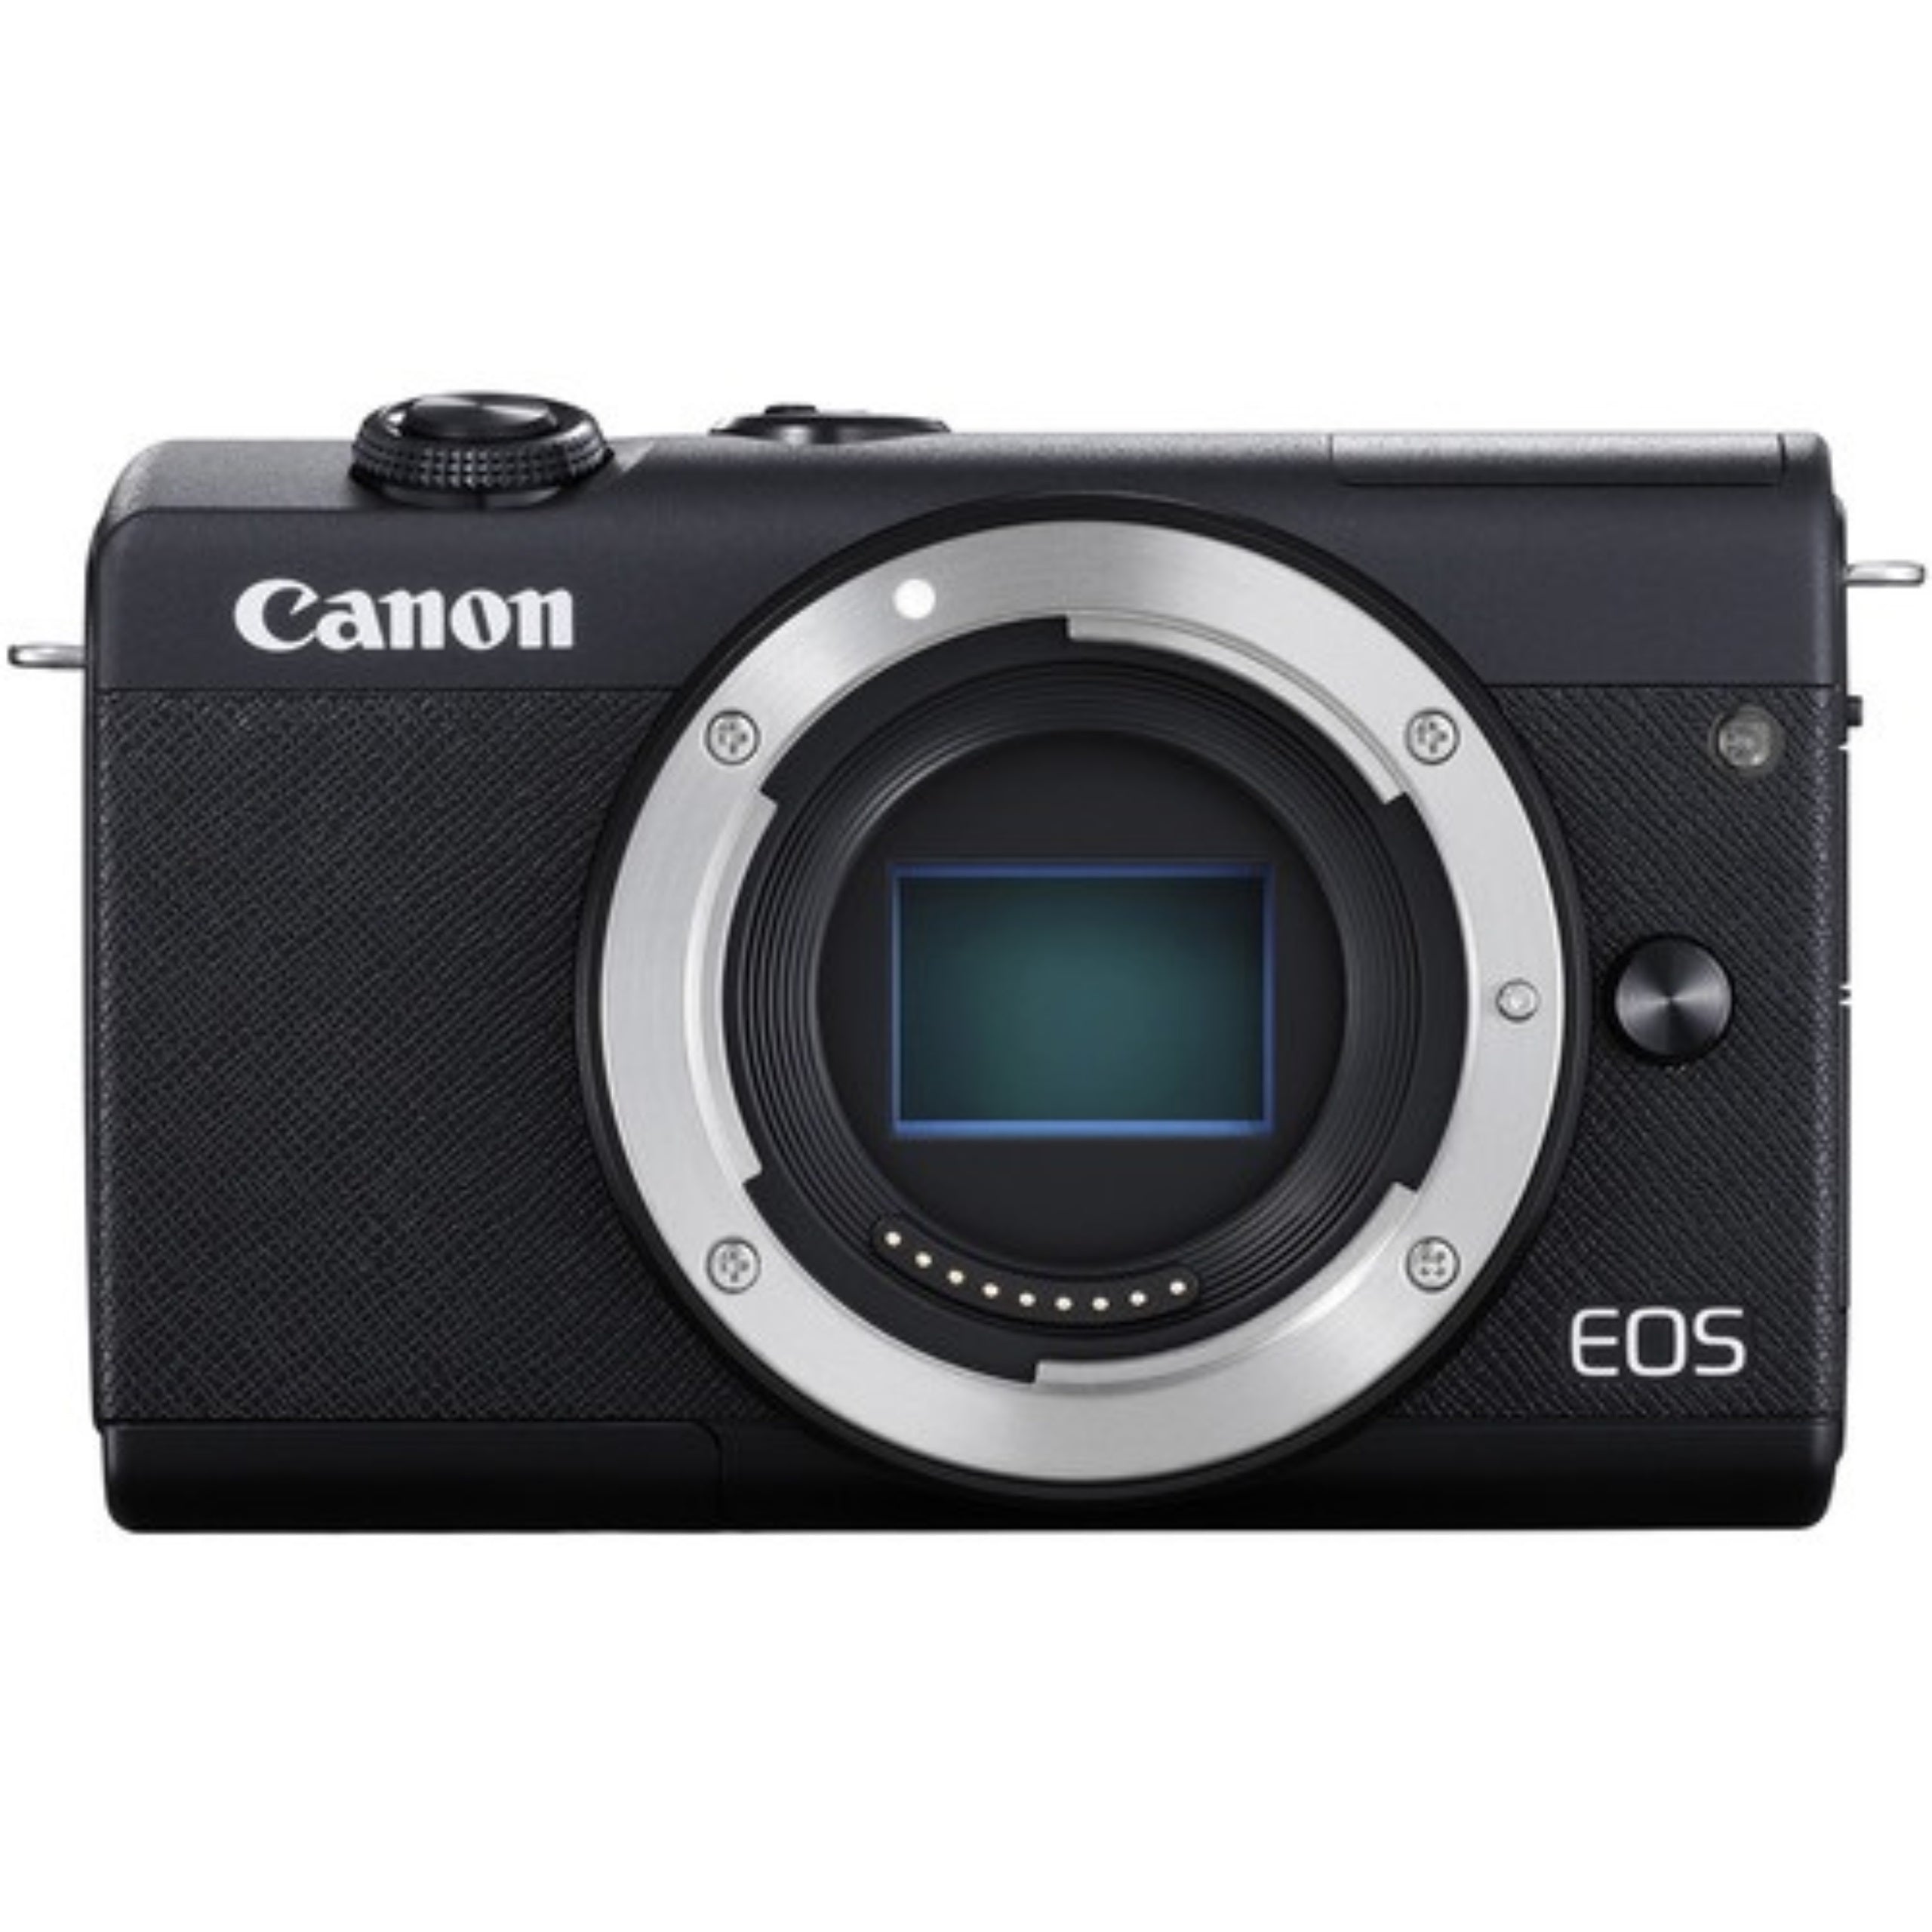 Canon EOS M200 Mirrorless Digital Camera - Black with 15-45mm Lens